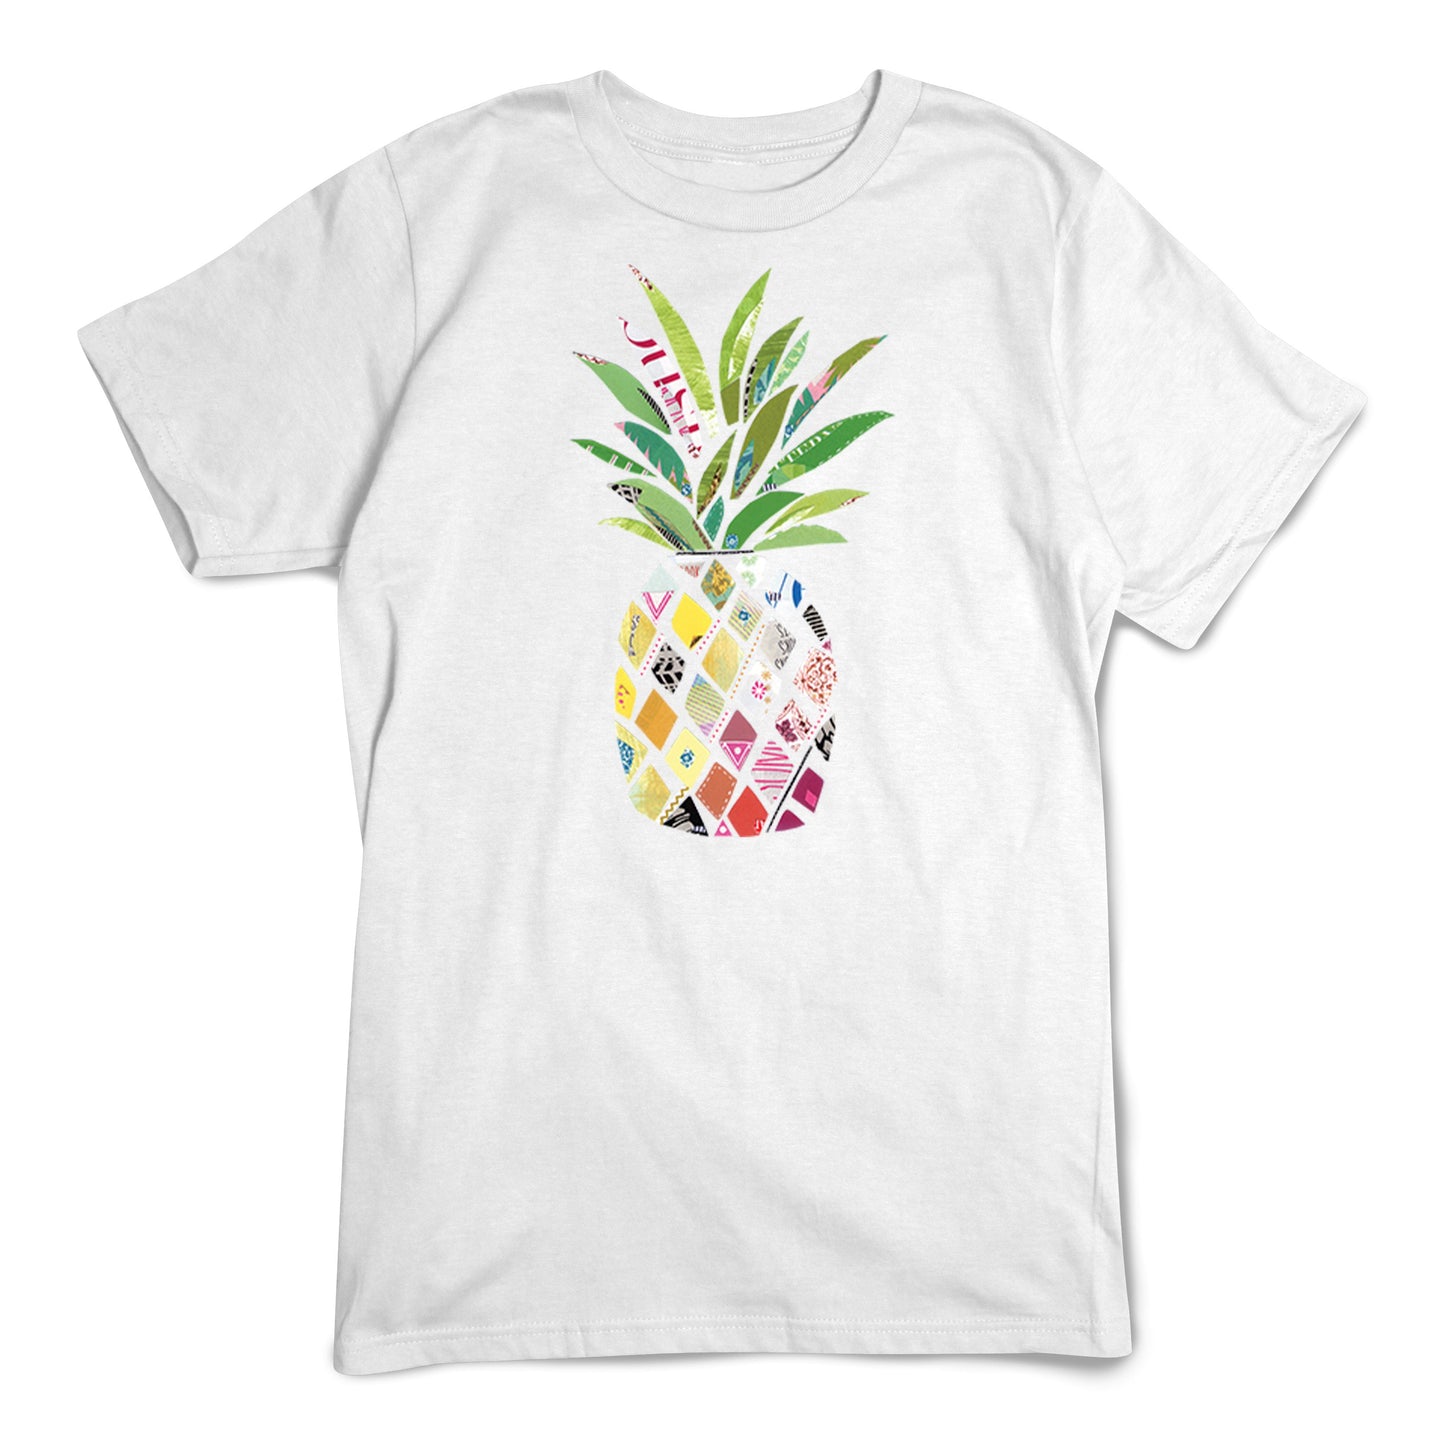 Patterned Pineapple T-Shirt